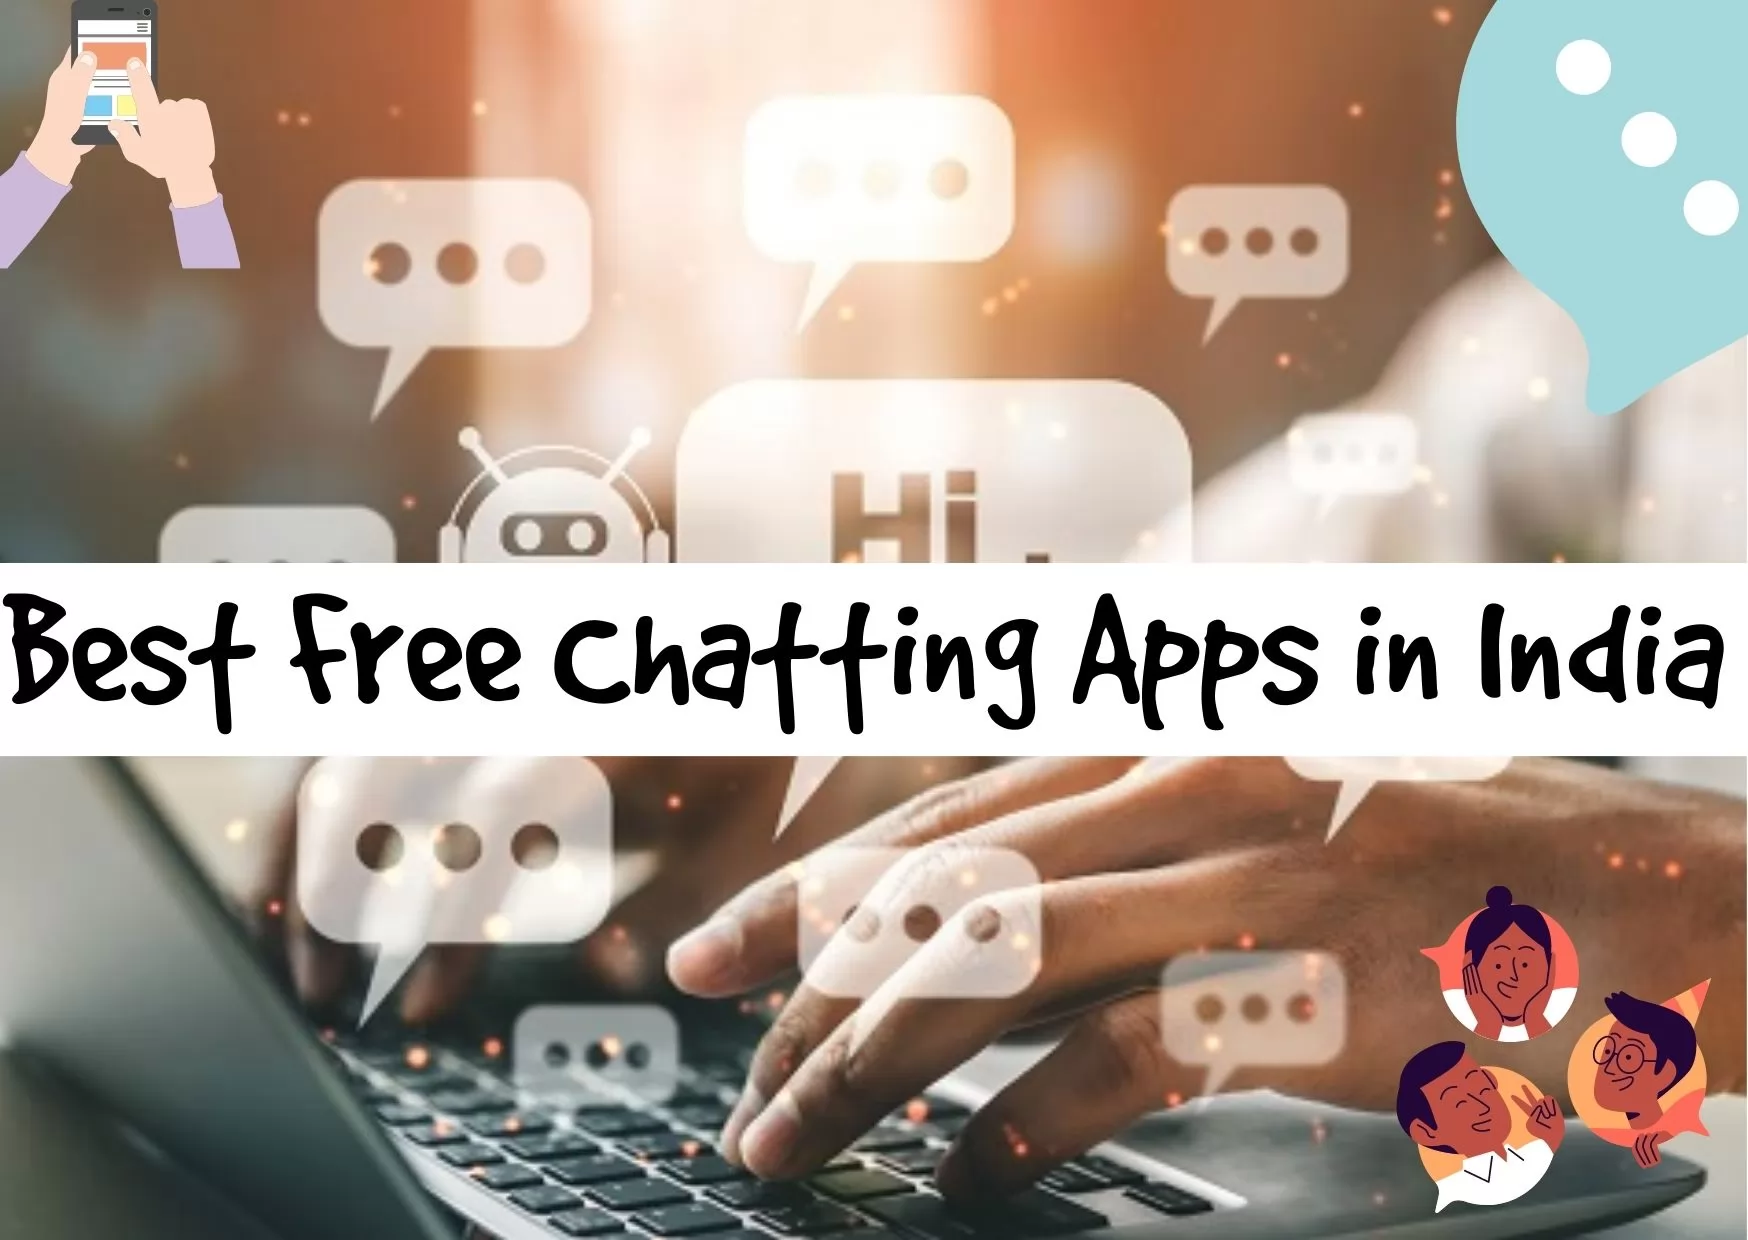 Best Free Chatting Apps in India